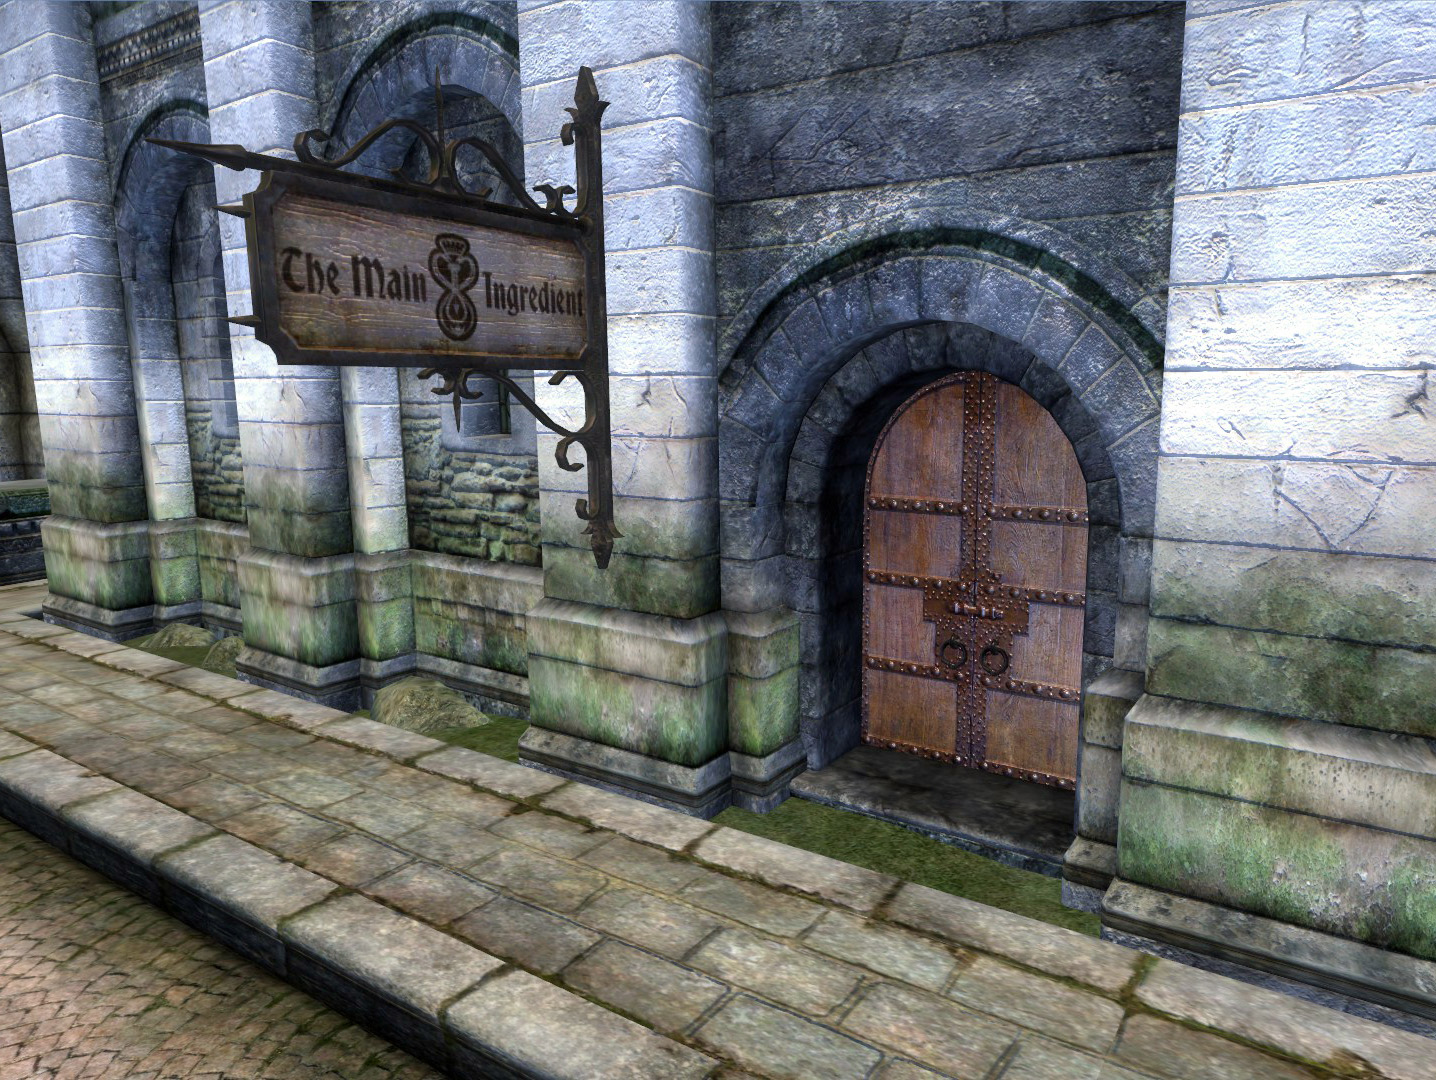 oblivion where to store items